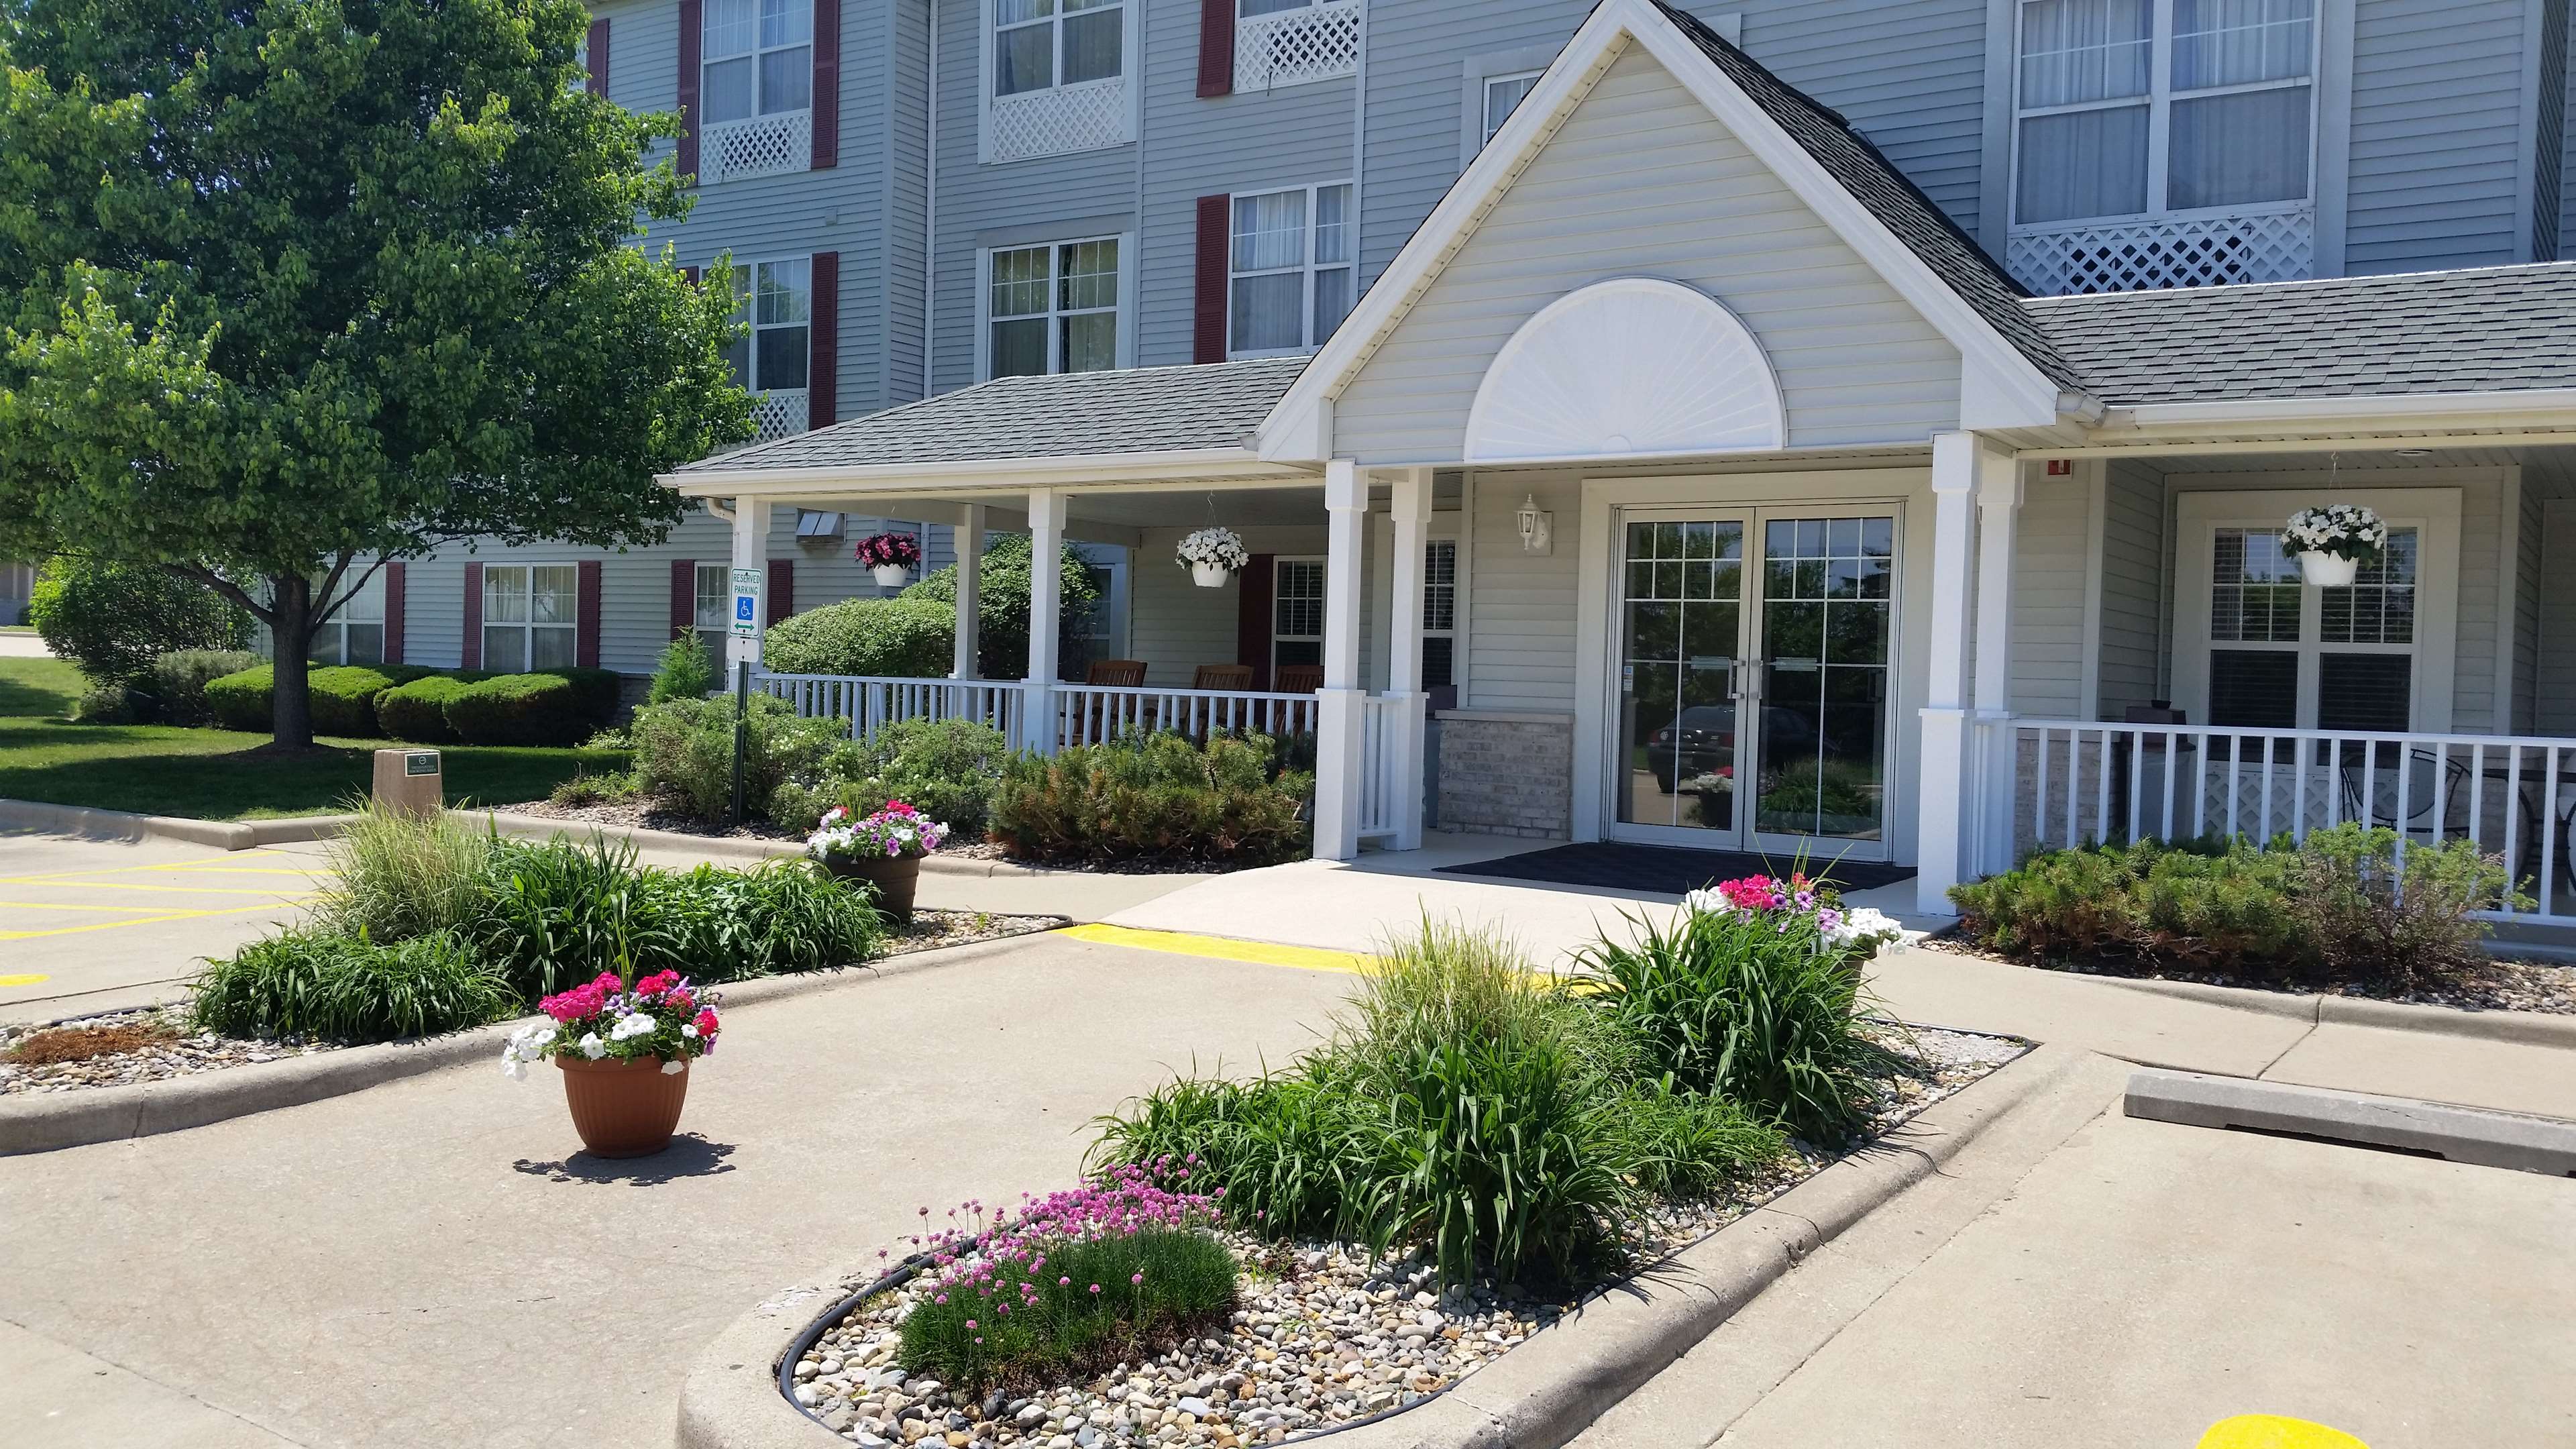 Country Inn & Suites by Radisson, Bloomington-Normal West, IL Photo